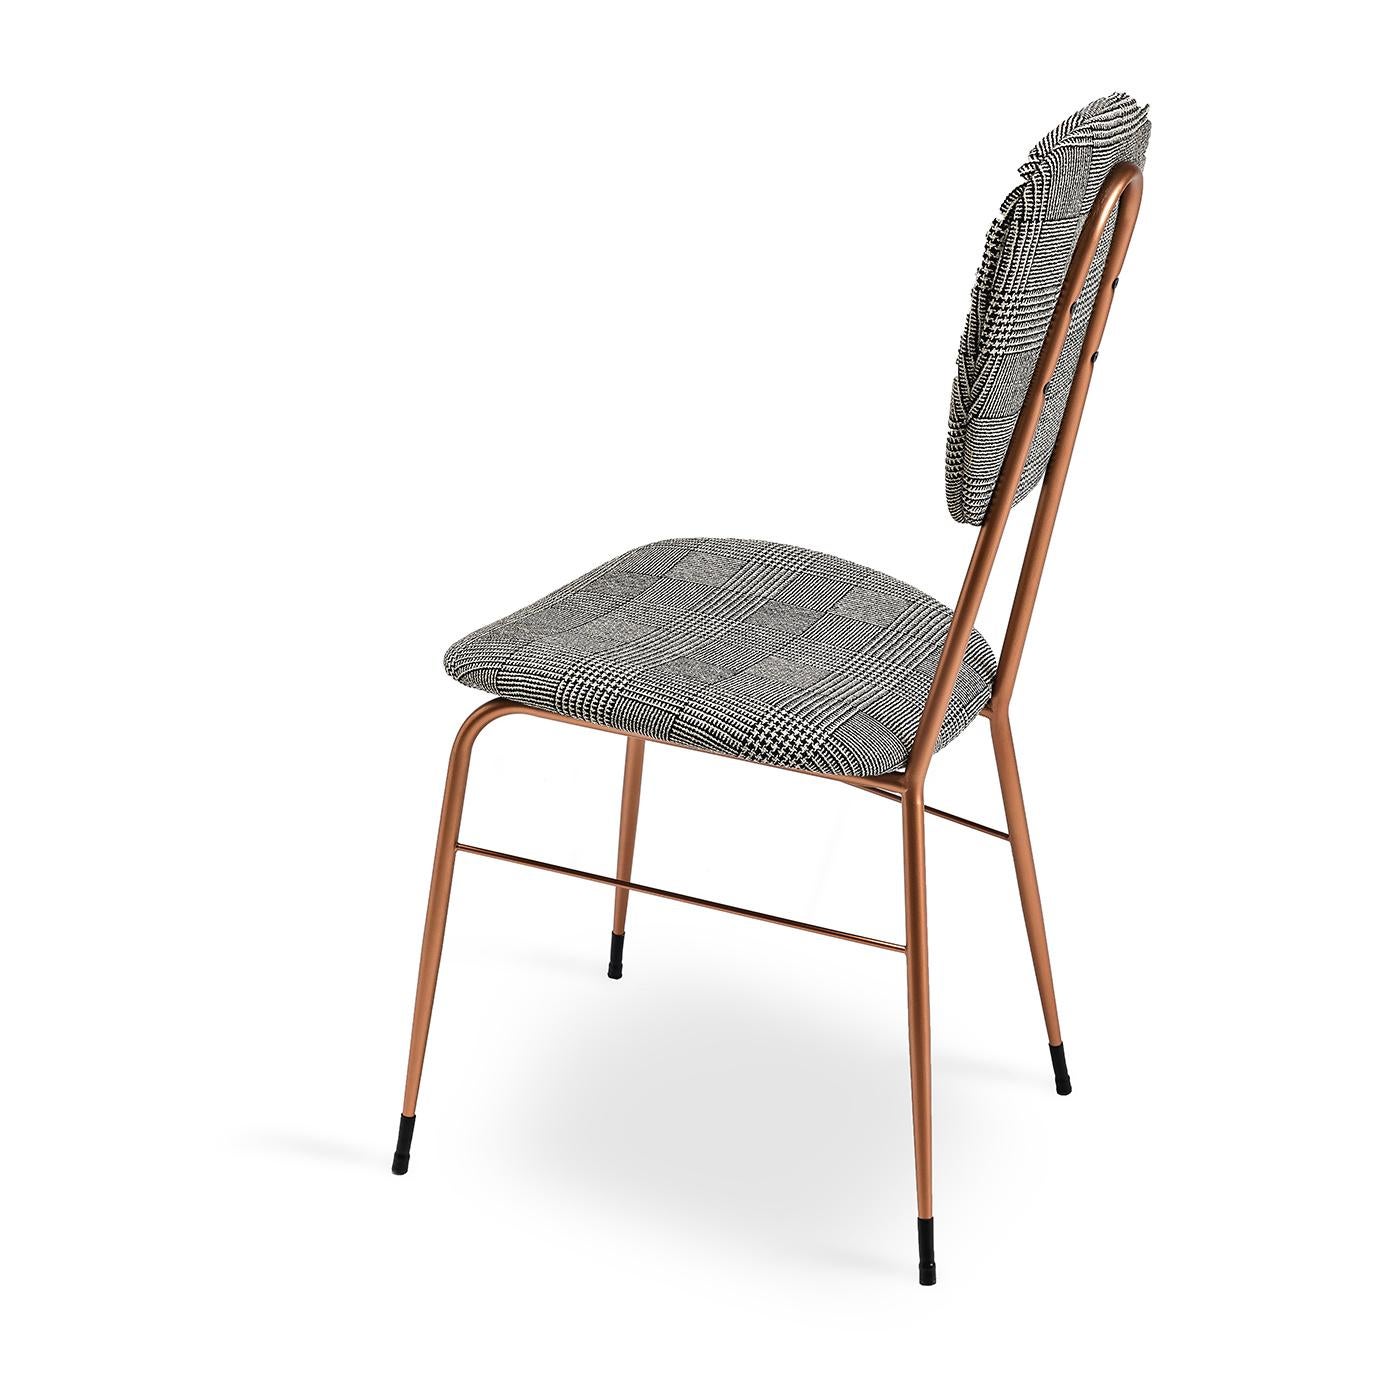 This cute dining chair is comfy and pretty to look at, with a back and seat that are structured thanks to polyurethane and curved wood inserts and upholstered in a non-removable, gray Glen plaid fabric for a homey look. The chair has a metal frame